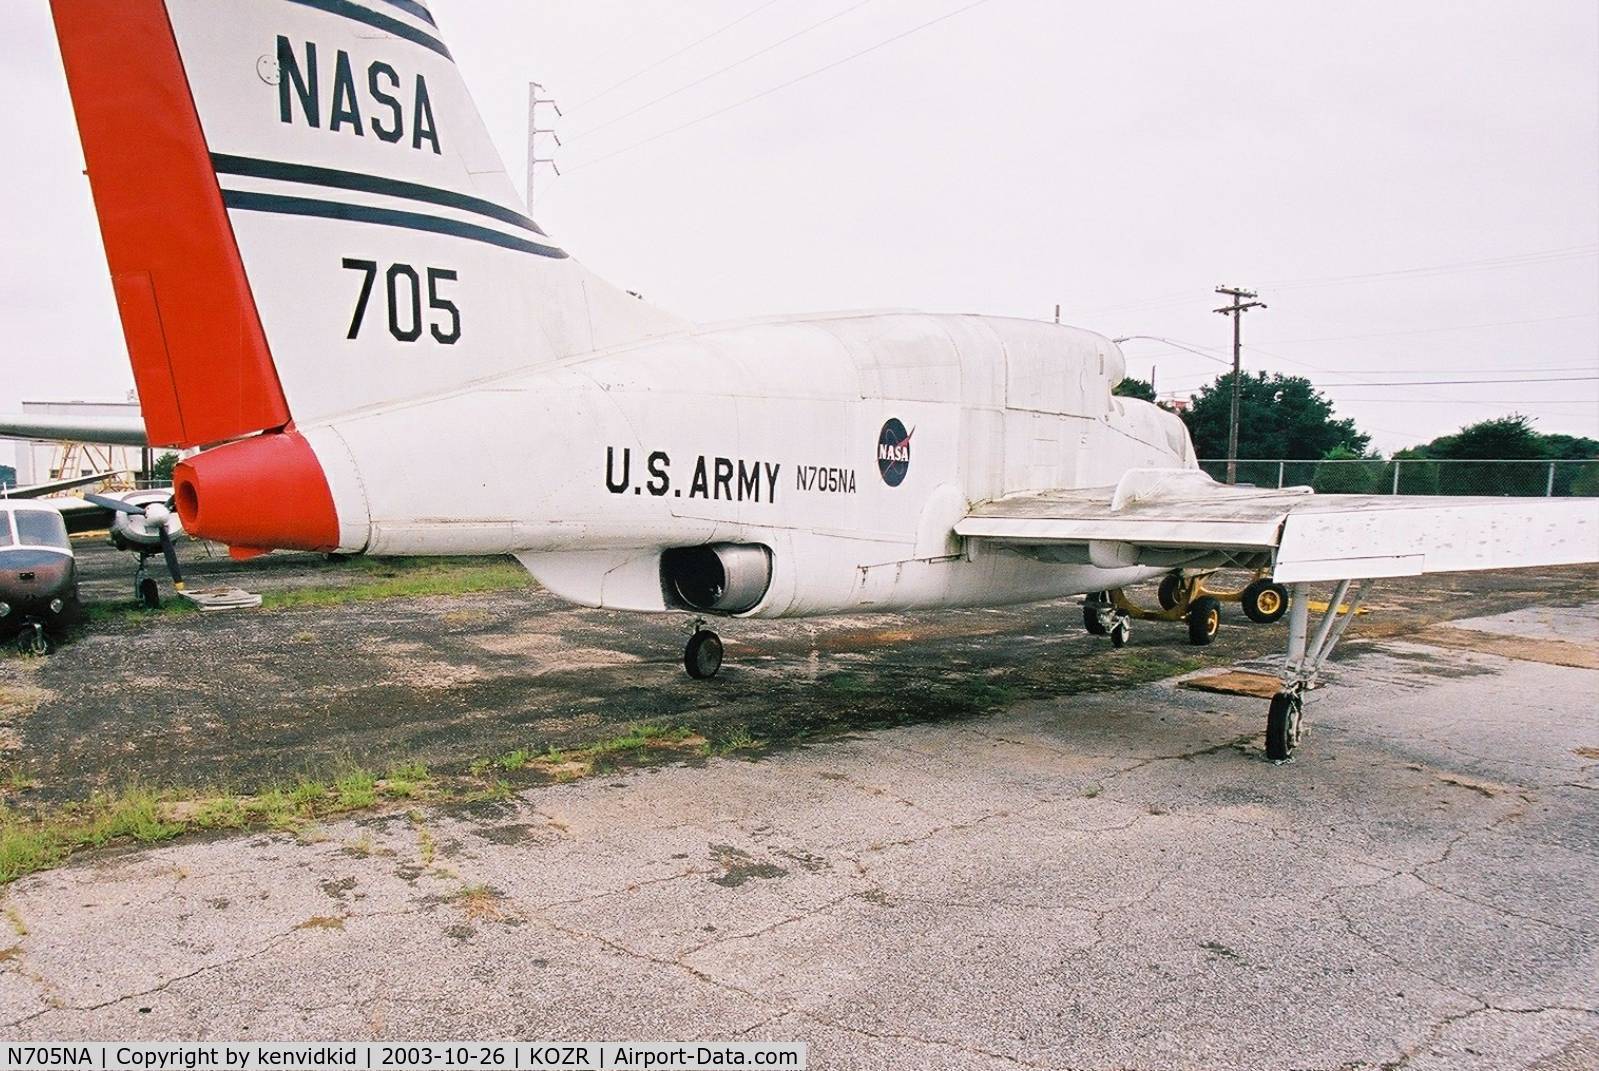 N705NA, 1962 Ryan Aeronautical XV-5B C/N Unknown, At the Fort Rucker Museum storage compound.